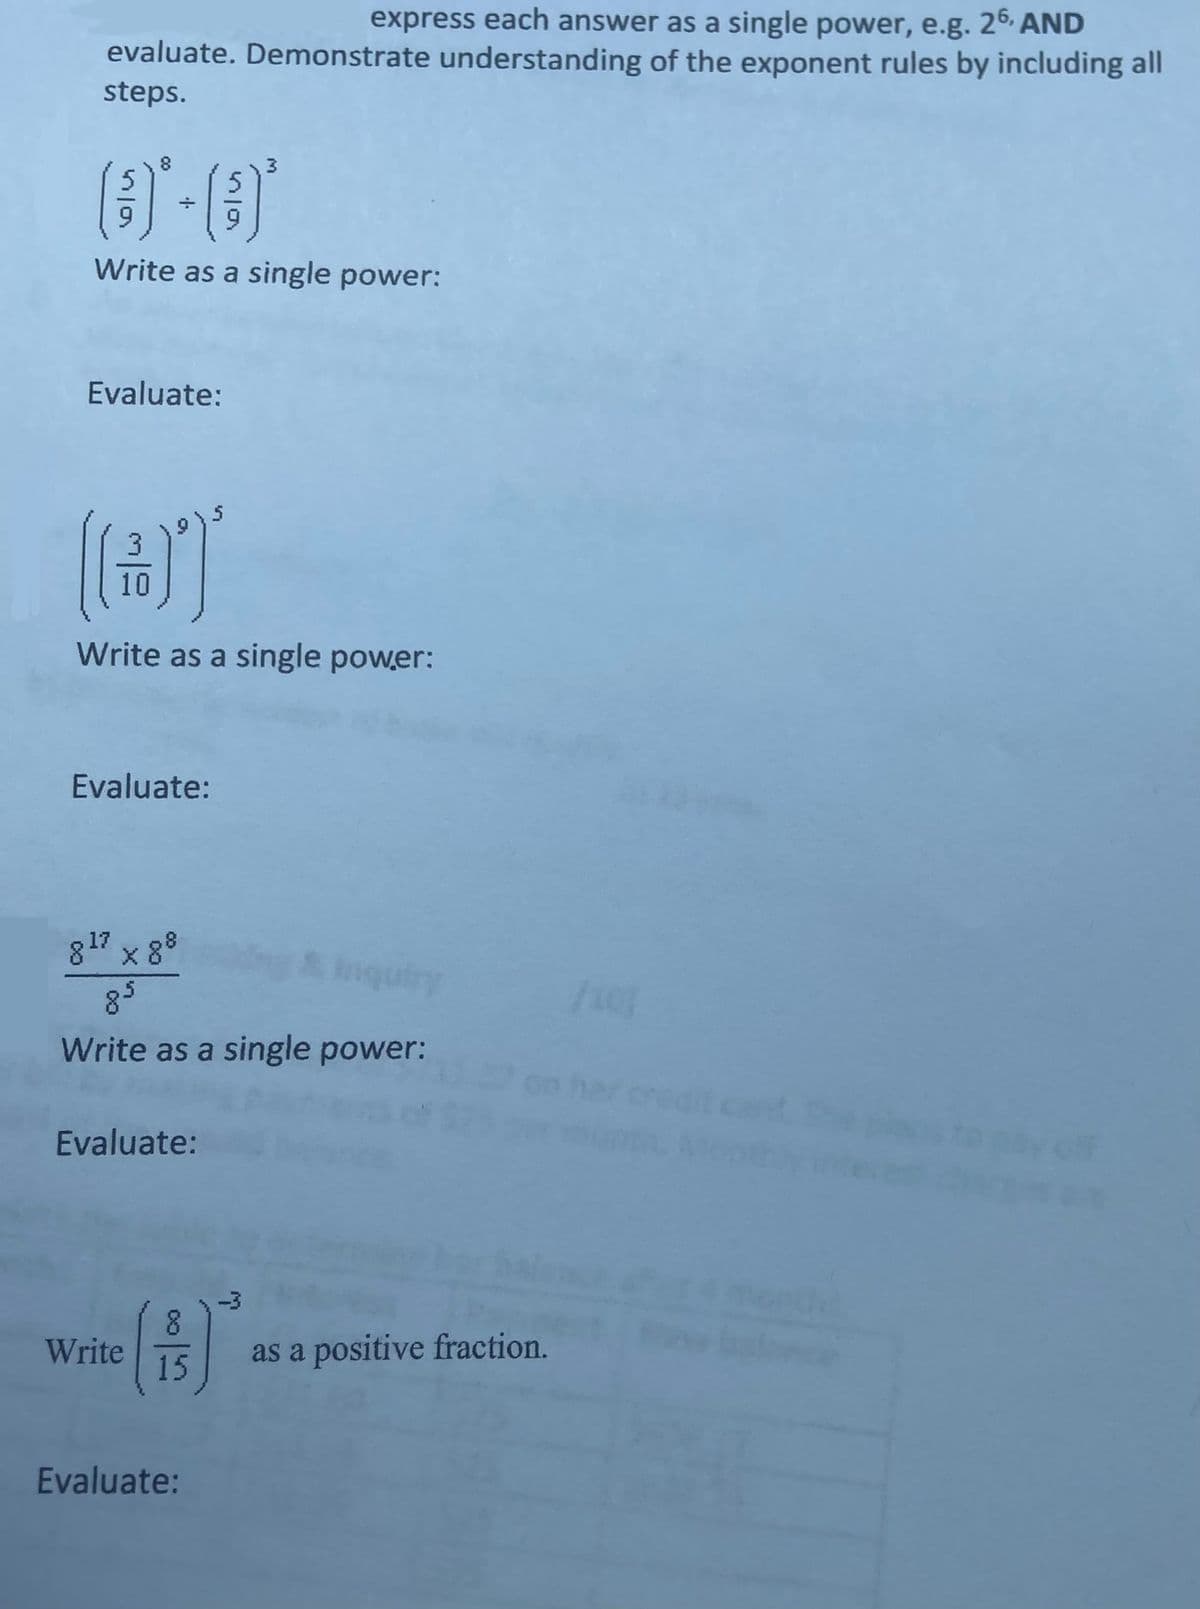 express each answer as a single power, e.g. 26, AND
evaluate. Demonstrate understanding of the exponent rules by including all
steps.
(3) * +
Write as a single power:
Evaluate:
(@T
10
Write as a single power:
Evaluate:
817 x 88
Inquiry
Write as a single power:
Evaluate:
8
(B)
15 as a positive fraction.
Write
Evaluate: